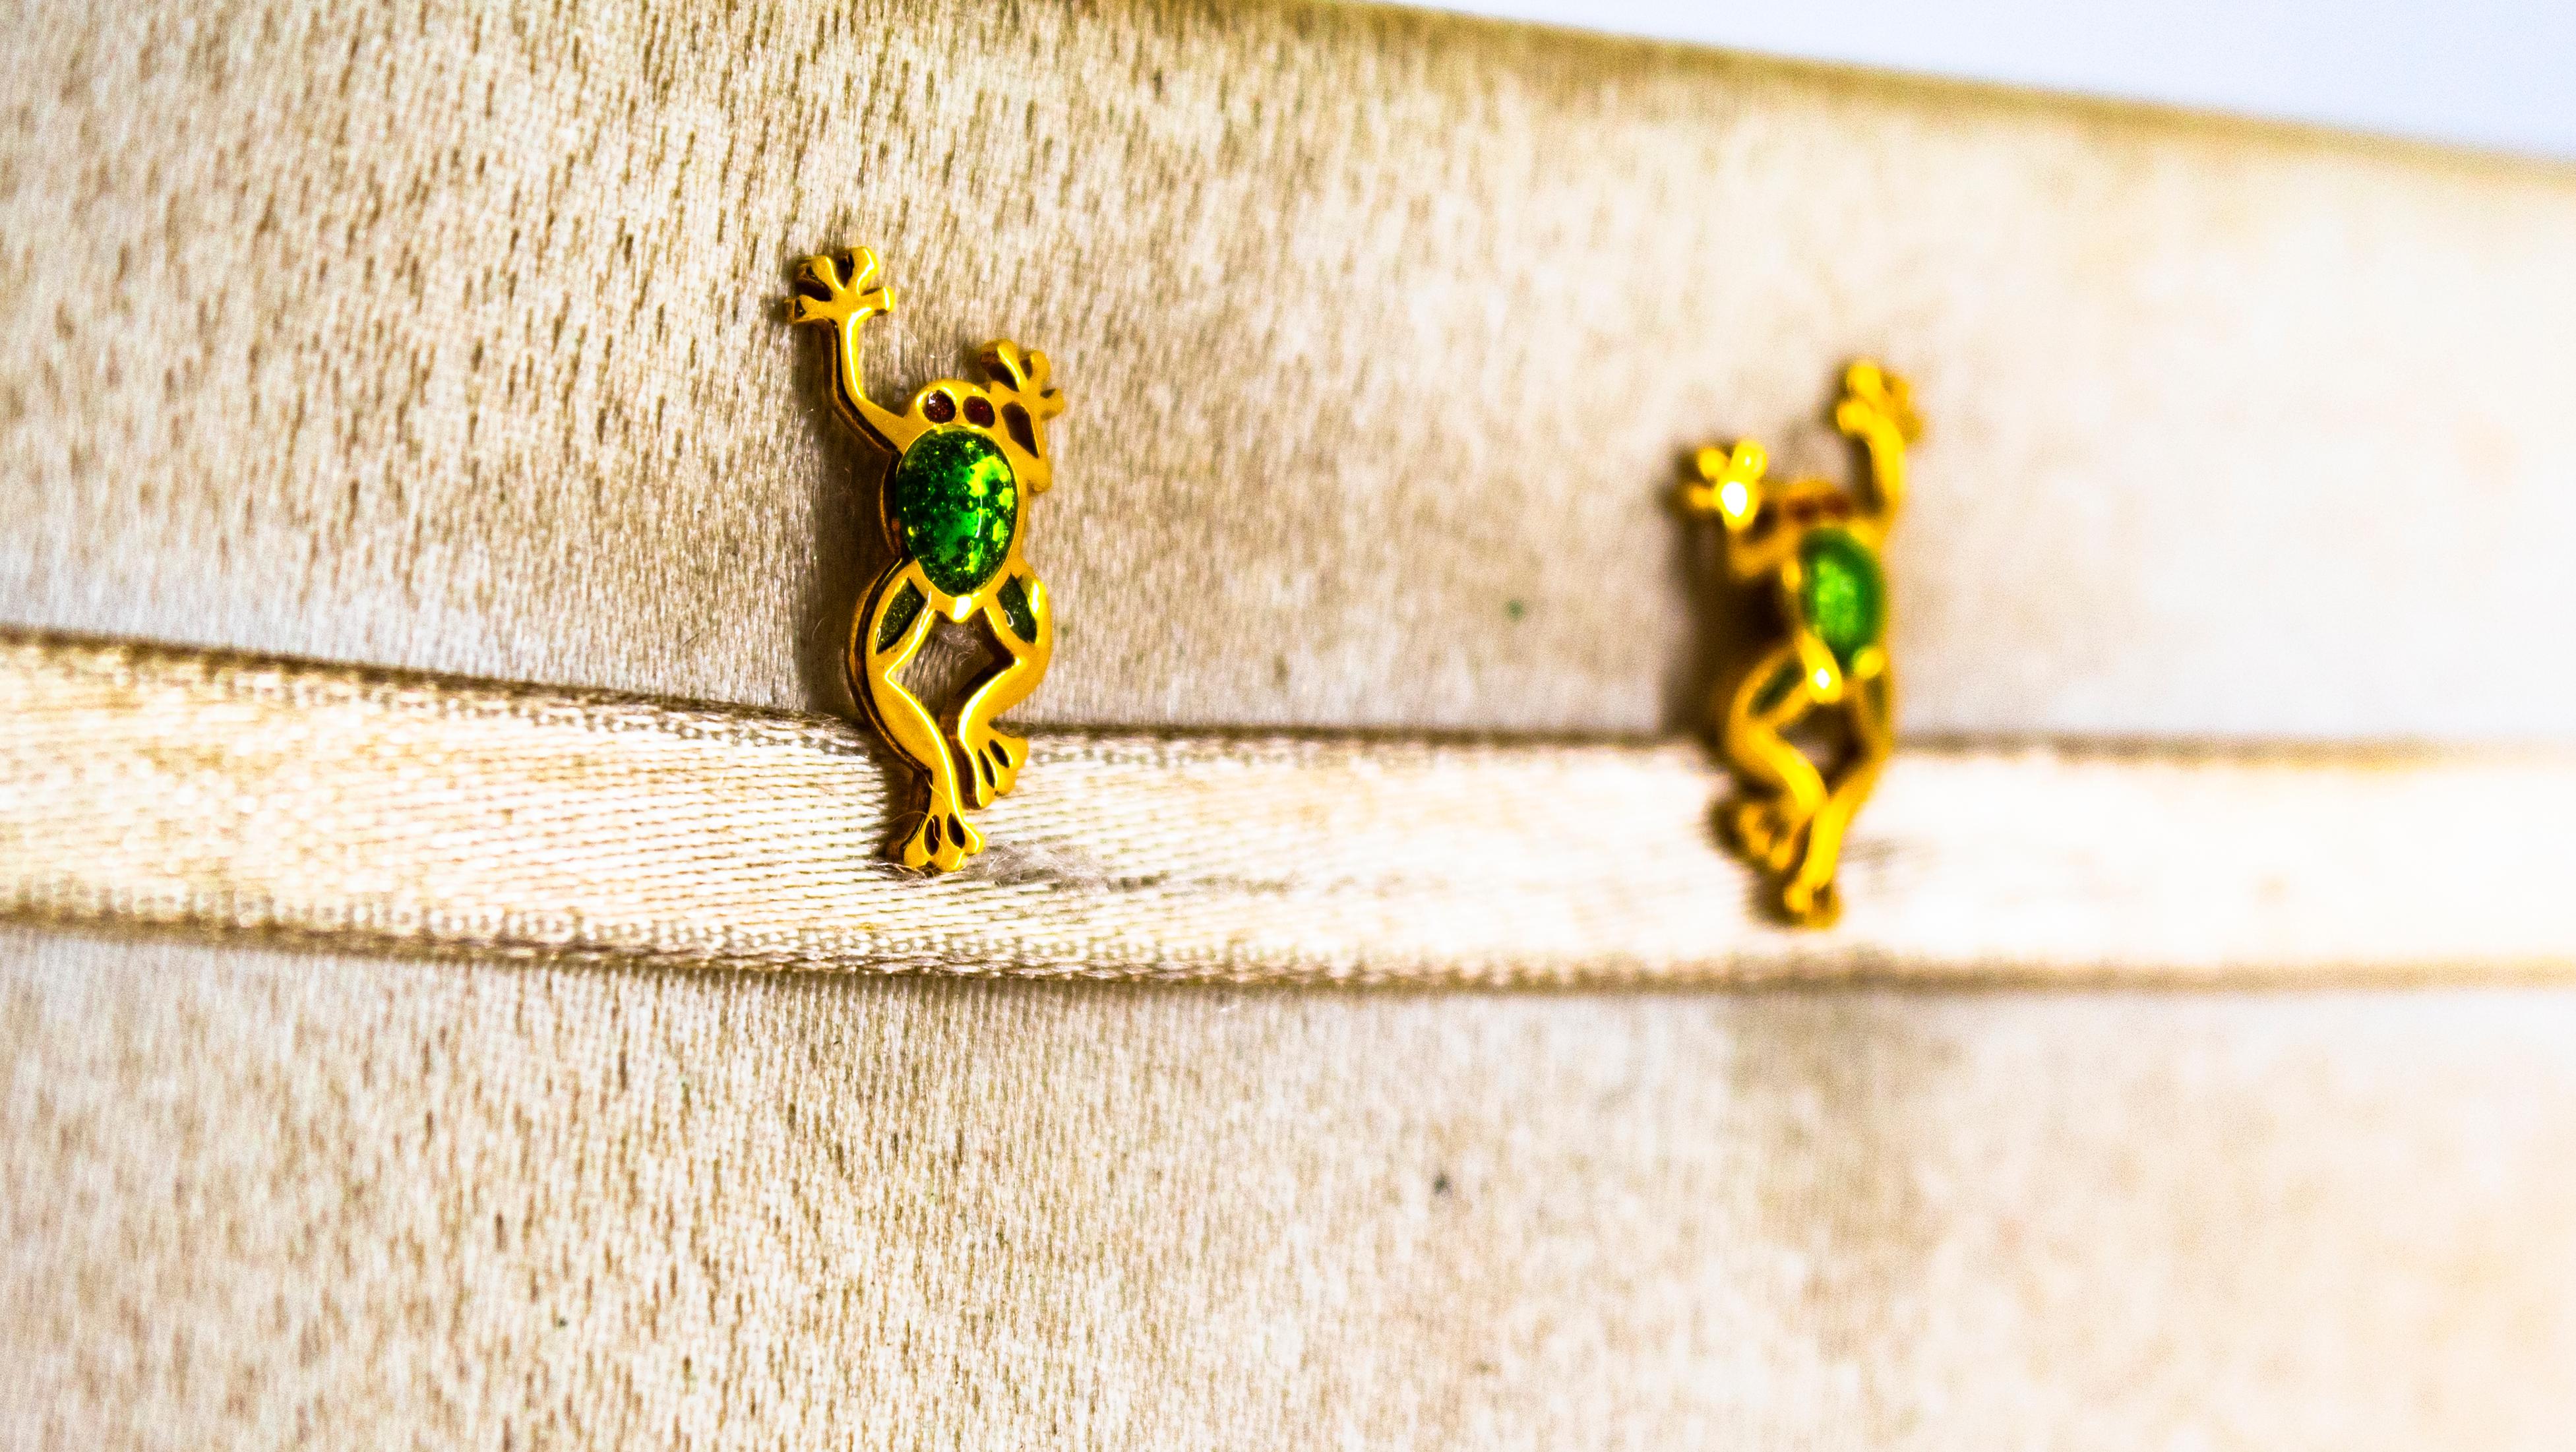 These Stud Earrings are made of 9K Yellow Gold.
These Earrings have Green Enamel.

These Earrings are available in two dimensions.
These Earrings are available also in 9K, 14K or 18K Yellow or White Gold.

All our Earrings have pins for pierced ears